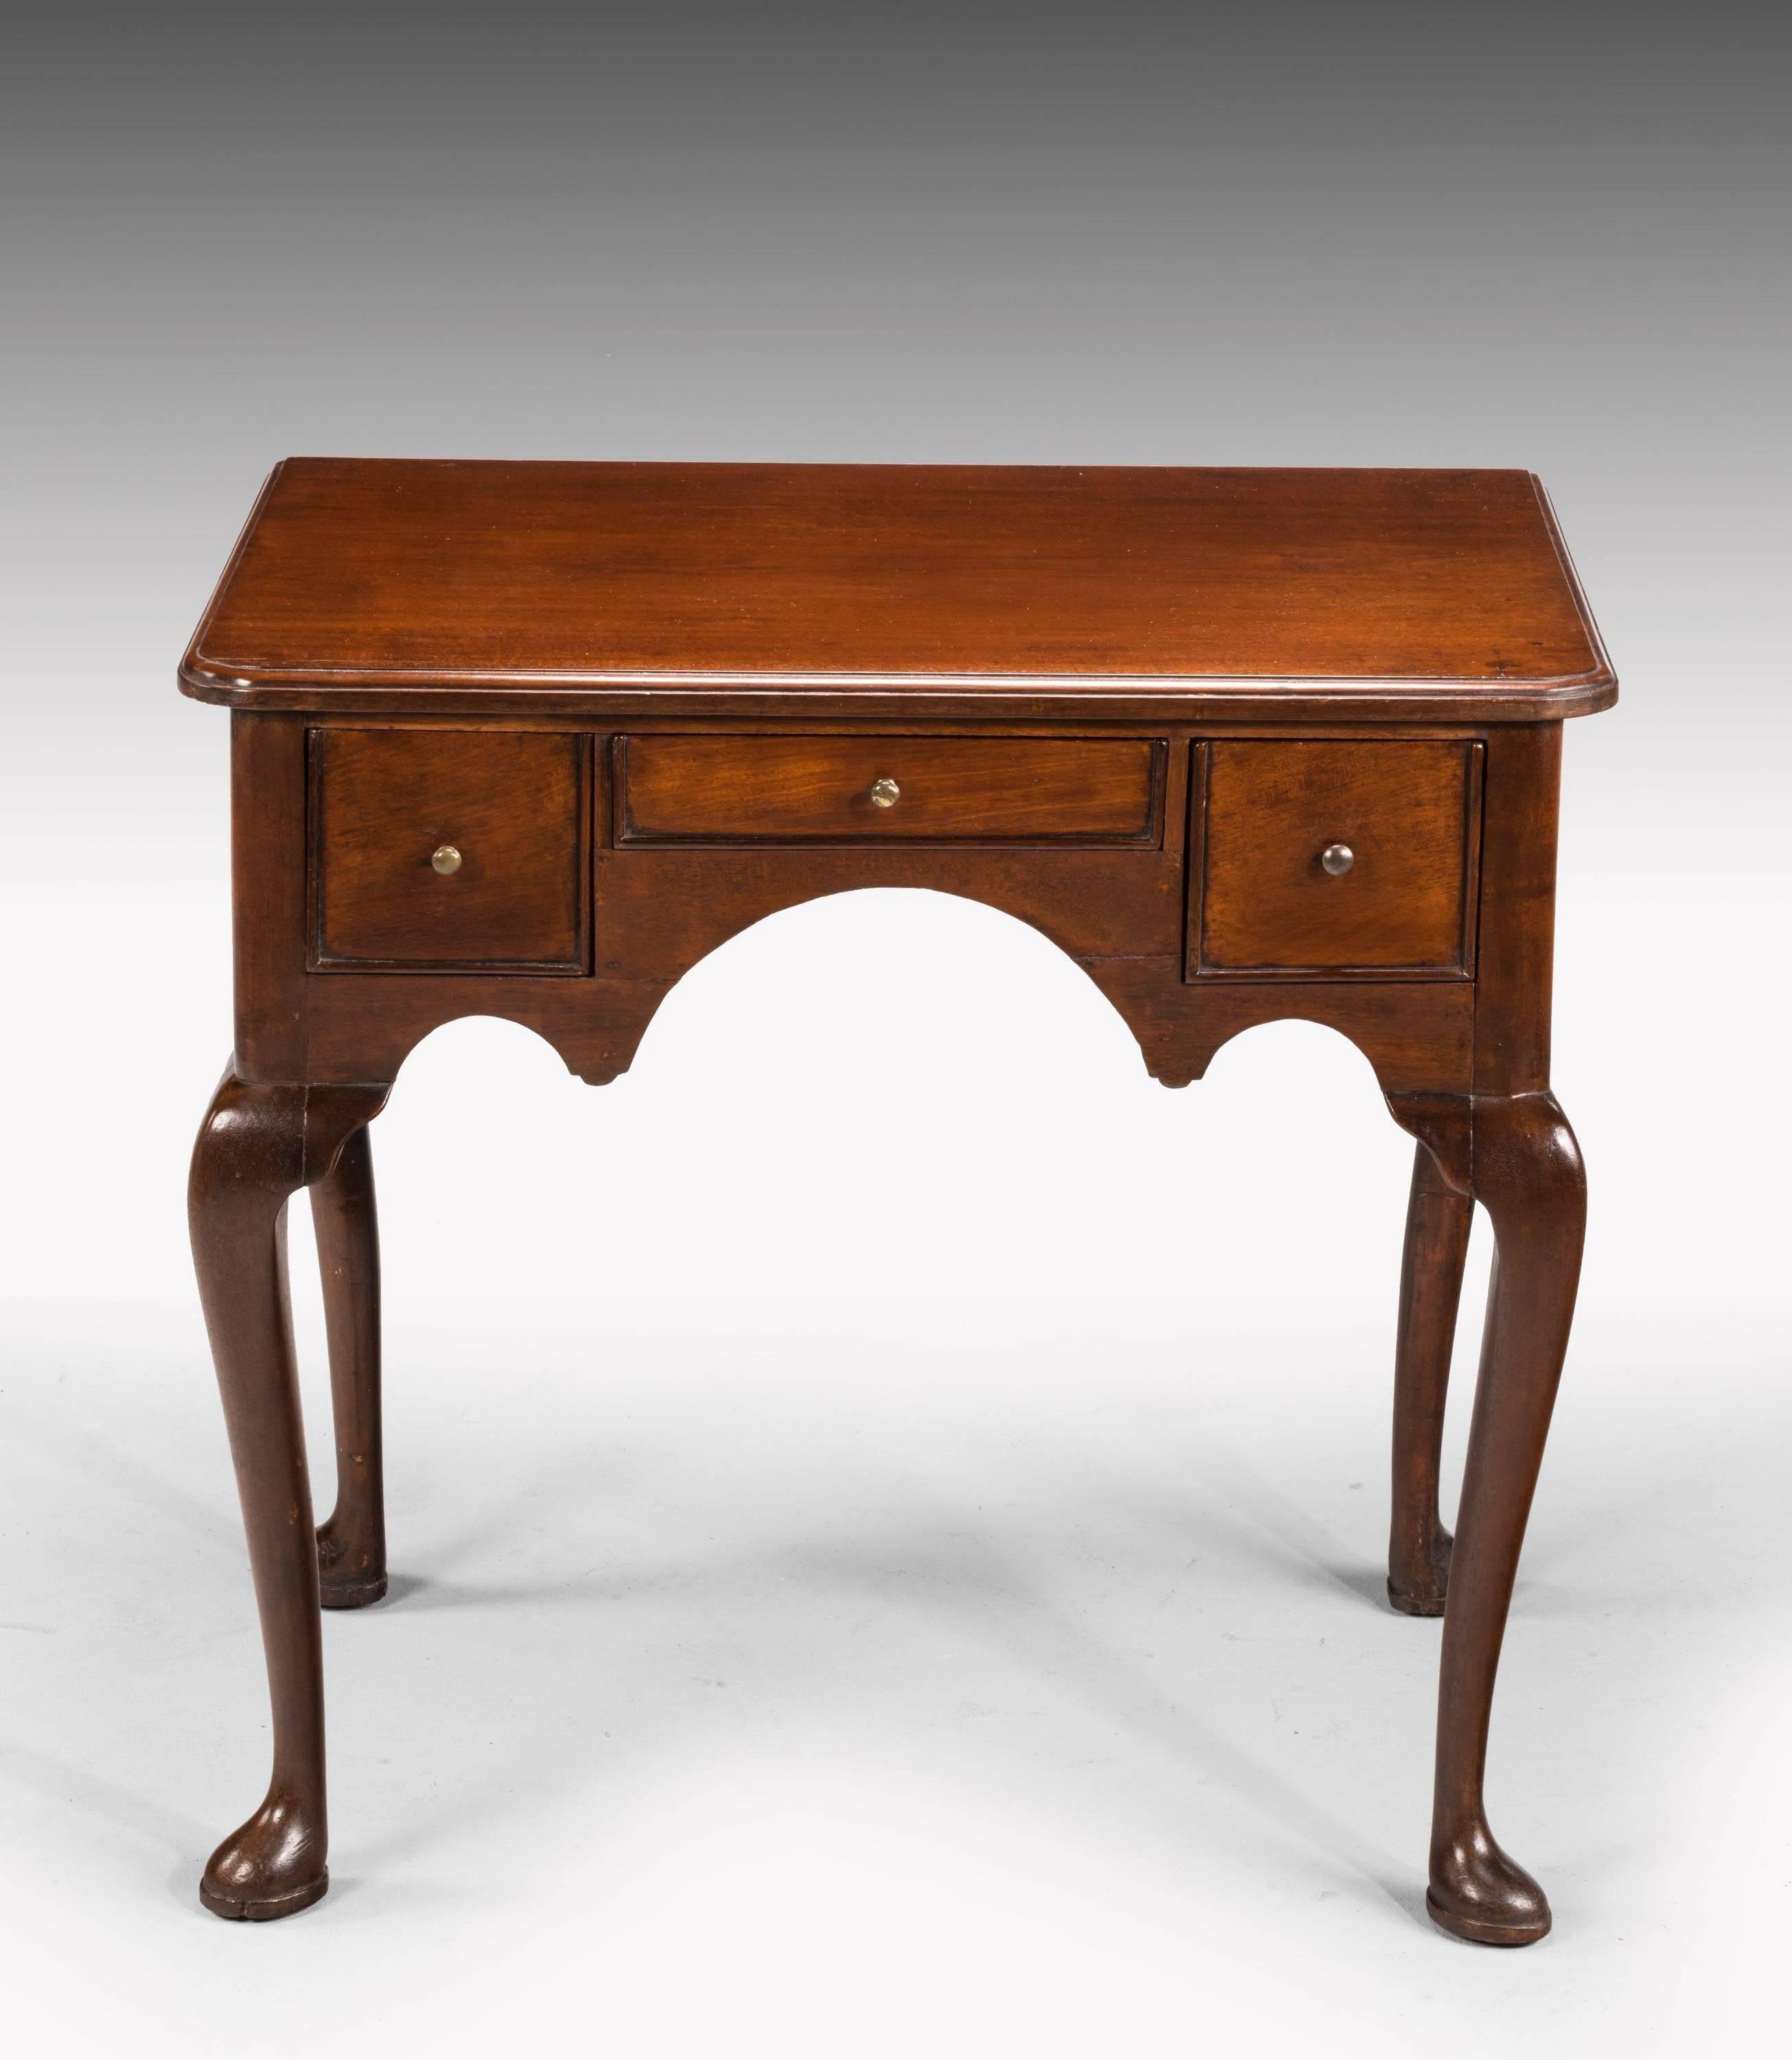 English Mid-18th Century Mahogany Lowboy on Well Shaped Cabriole Supports